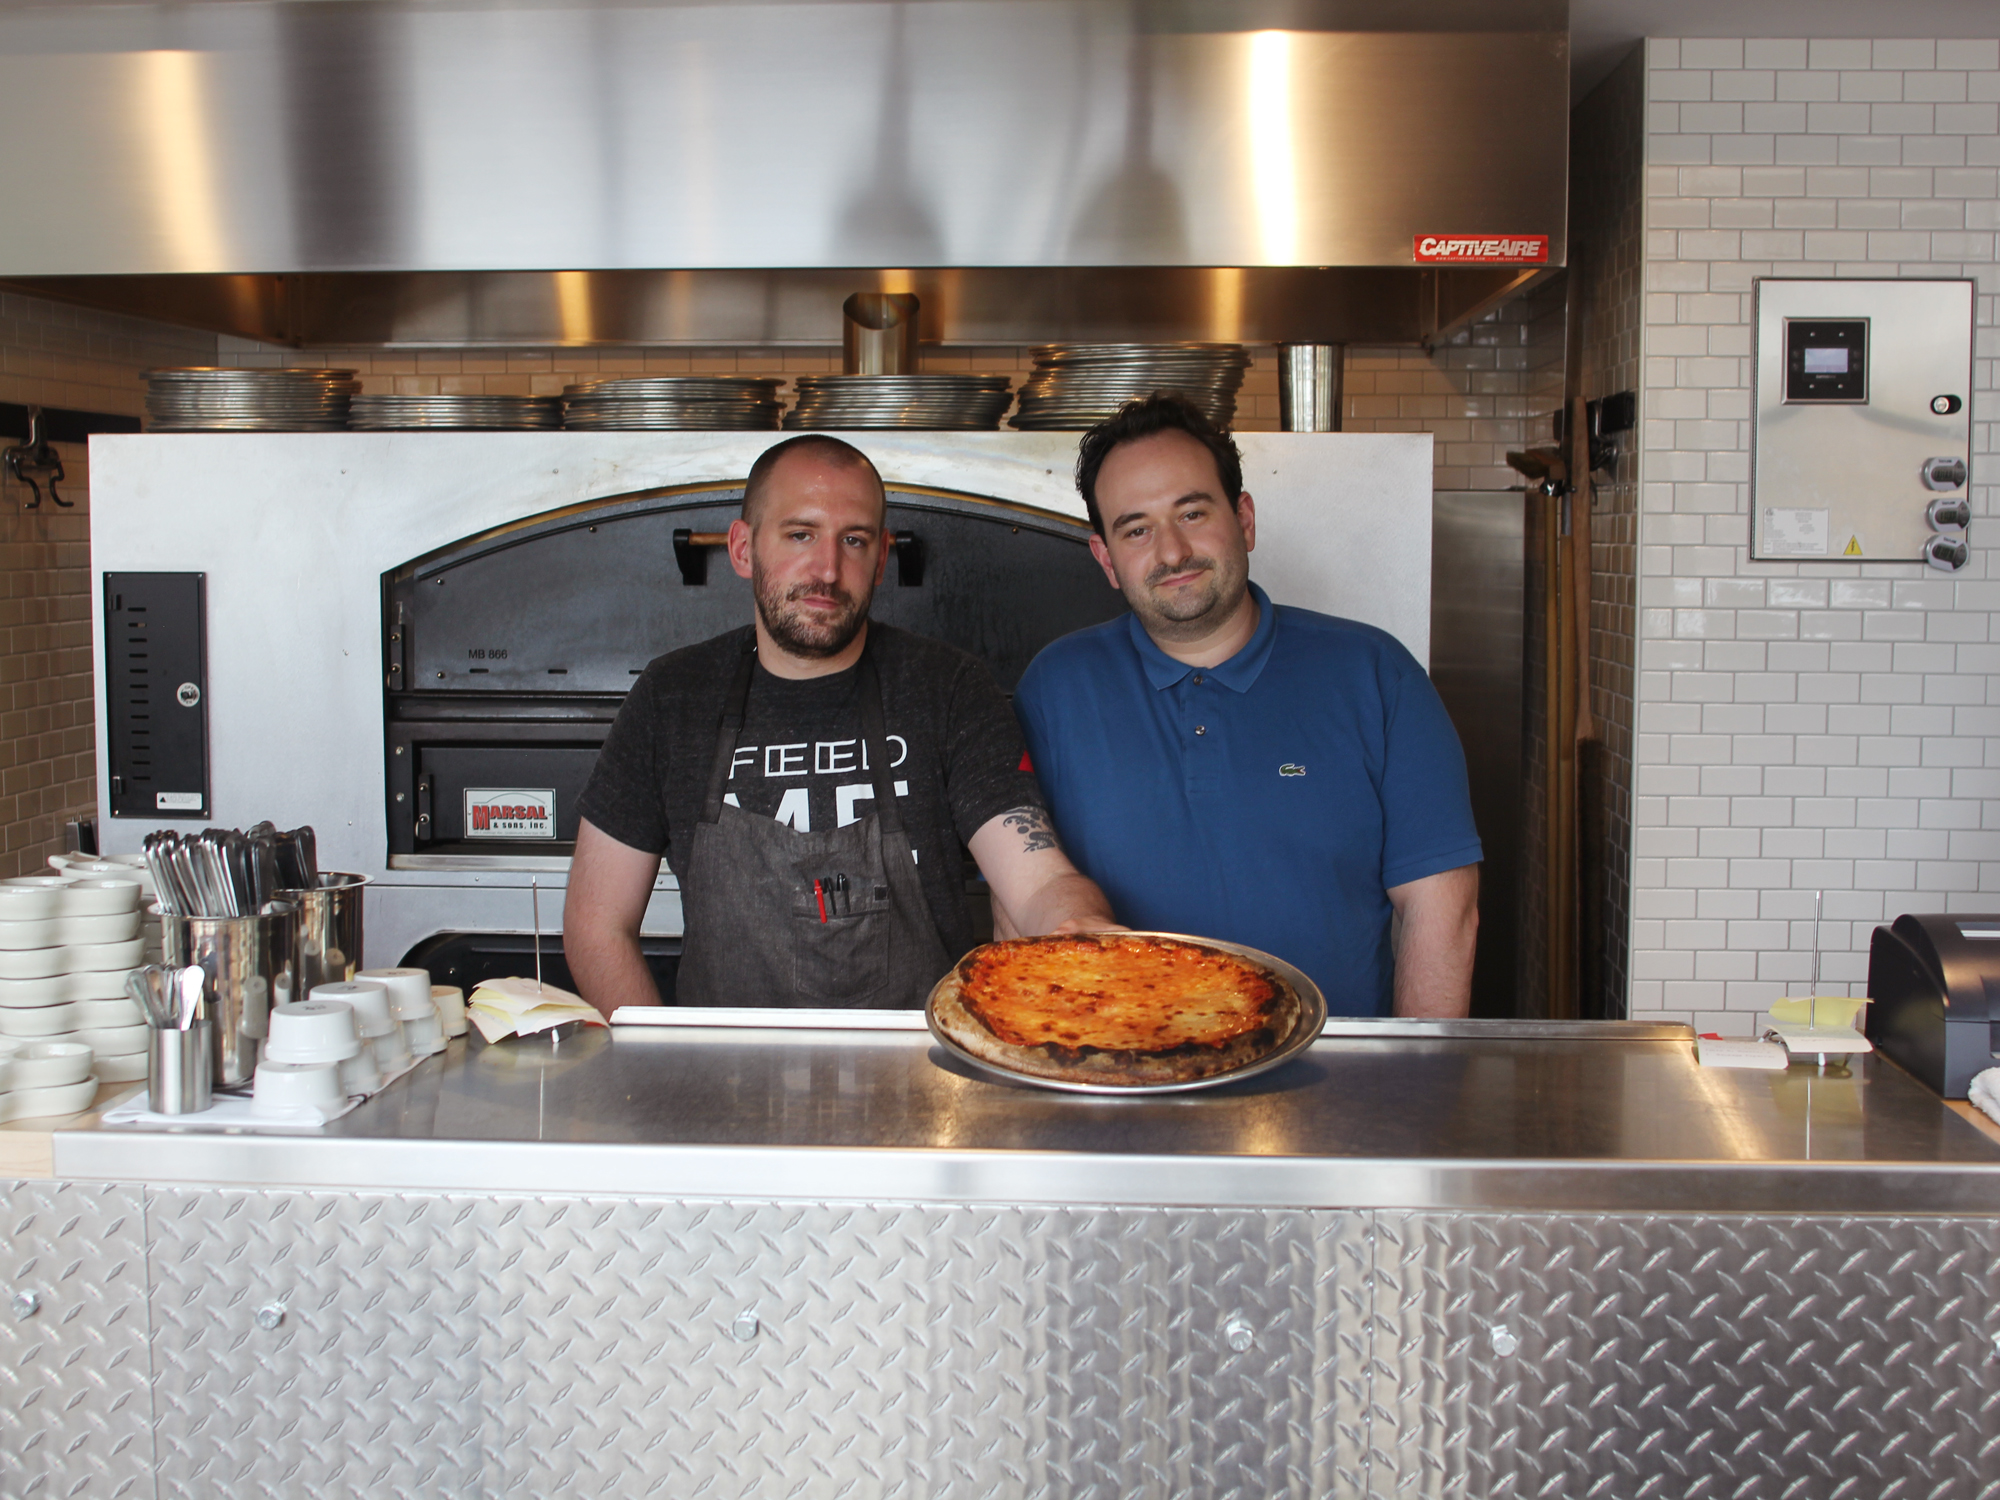 THEY TURNED FAMILY MEAL INTO A PIZZERIA OF THEIR OWN